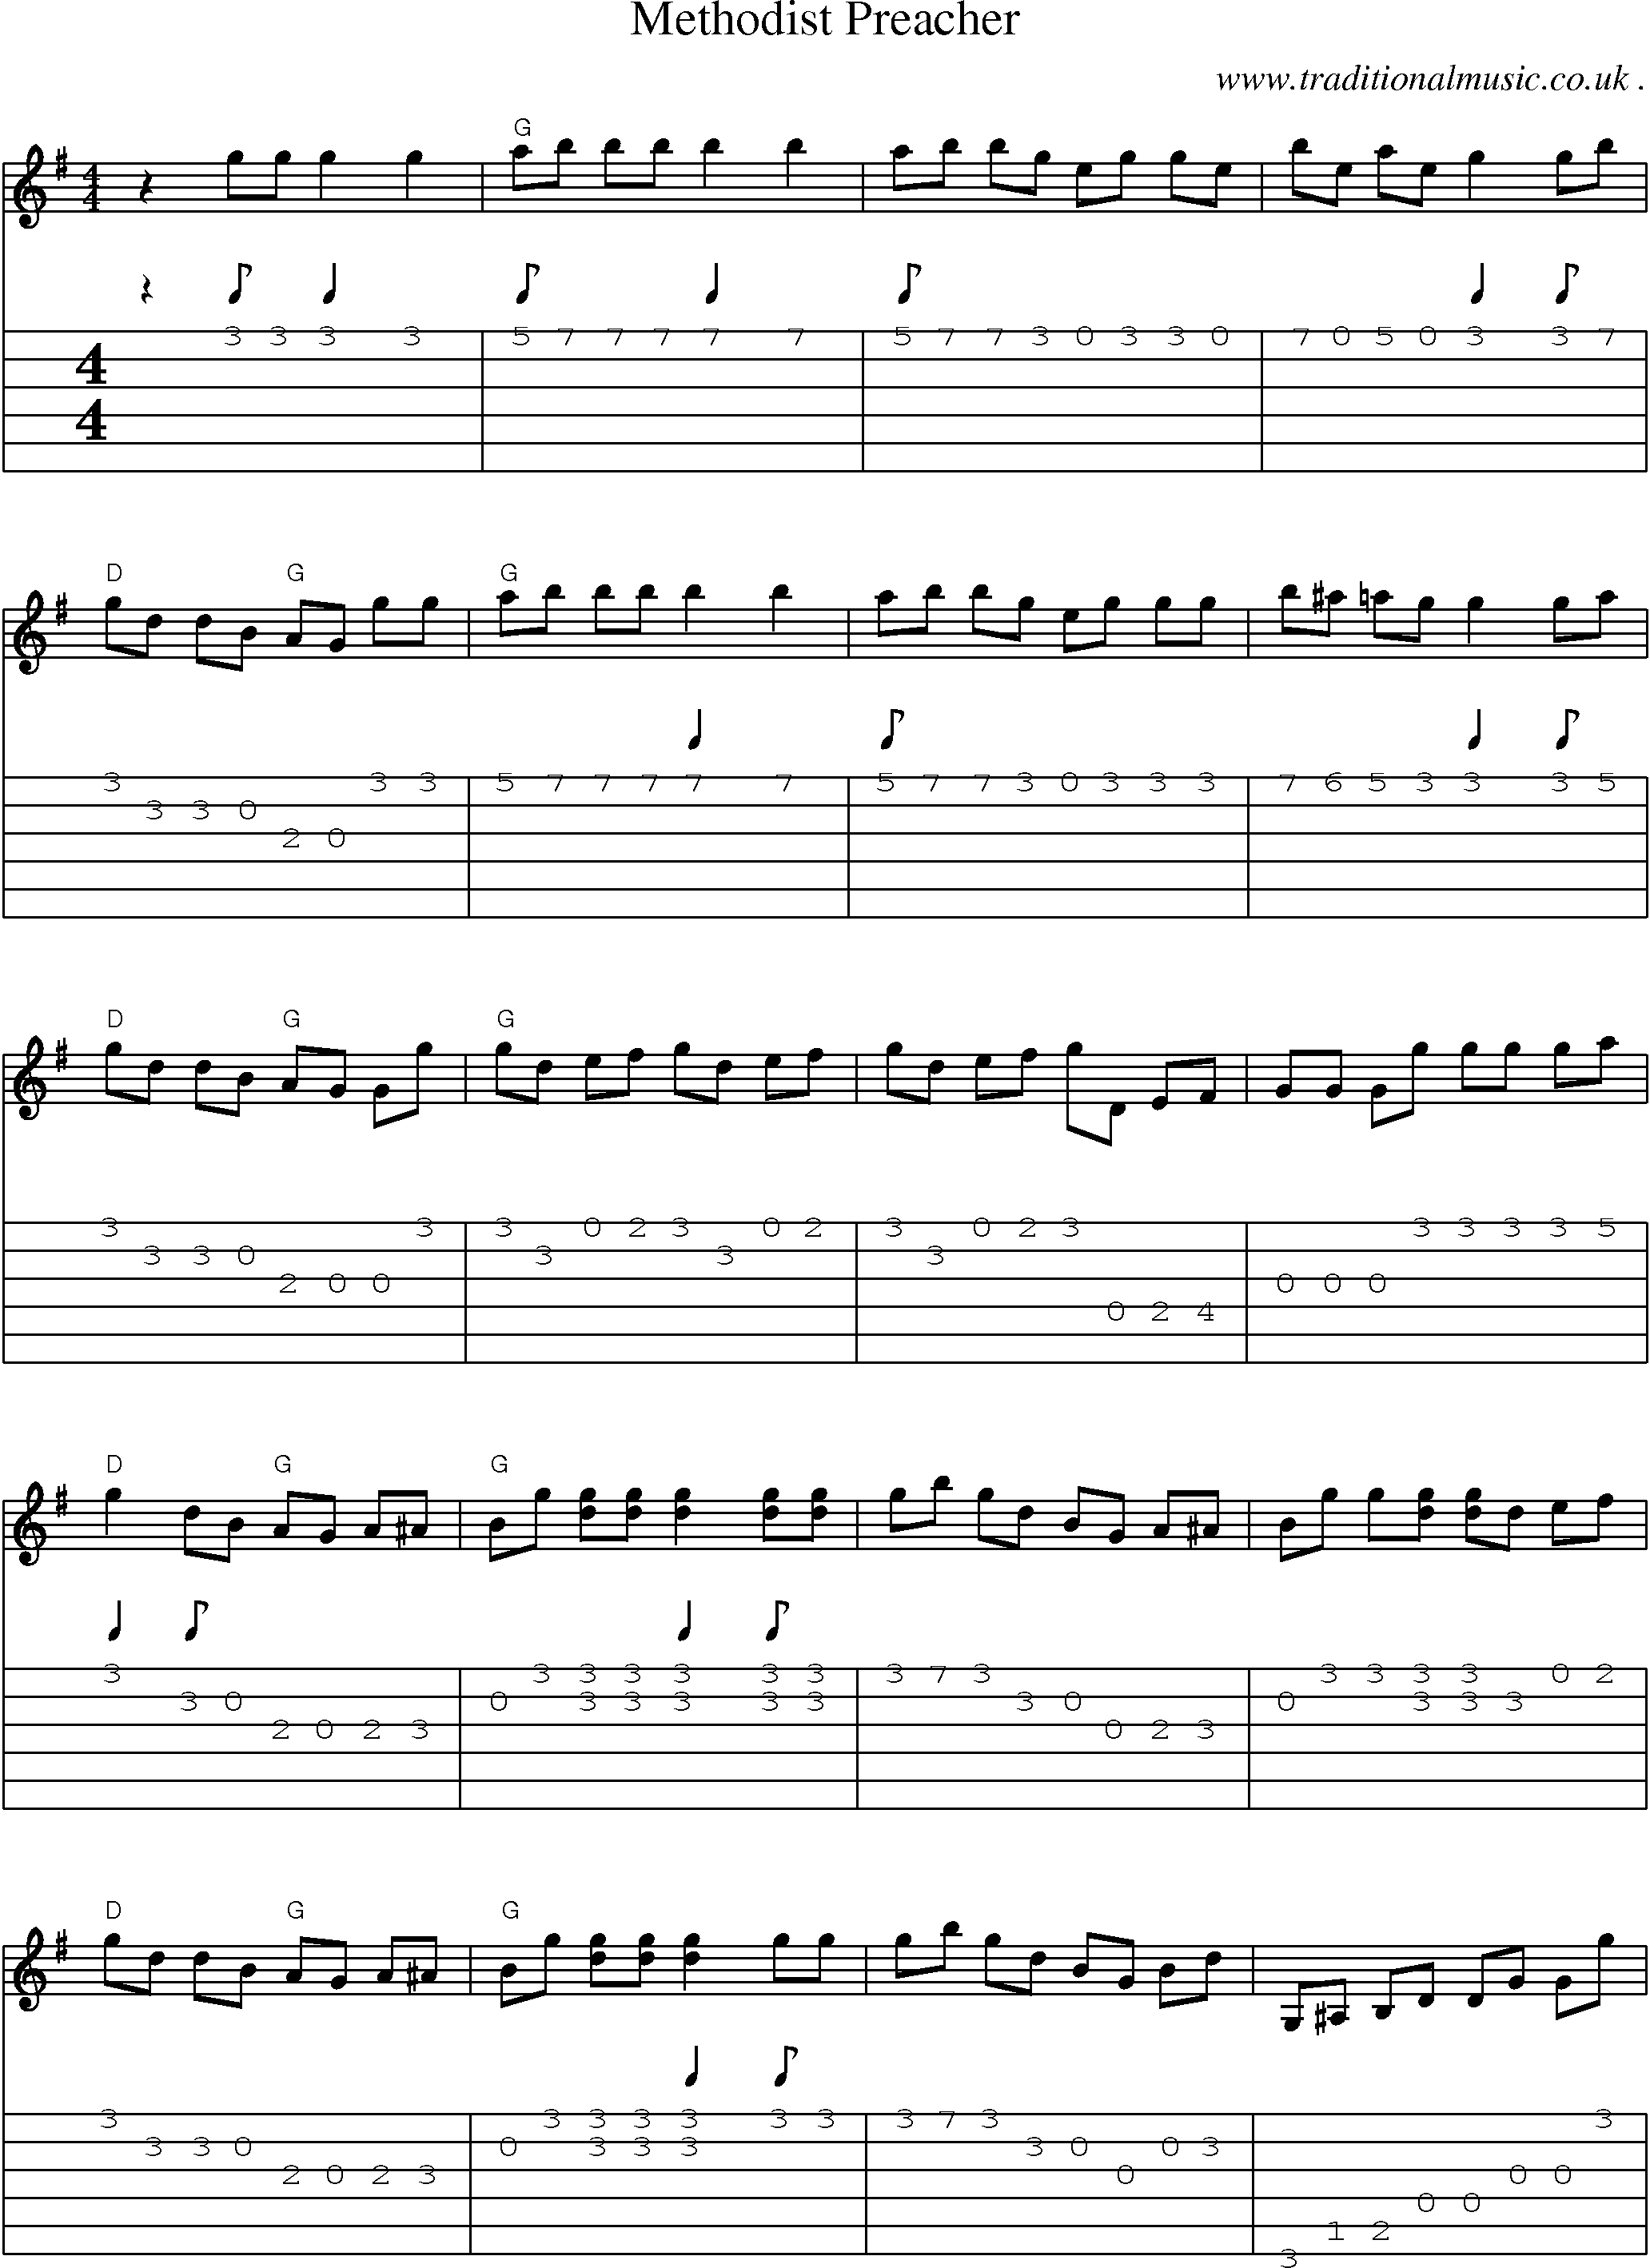 Music Score and Guitar Tabs for Methodist Preacher